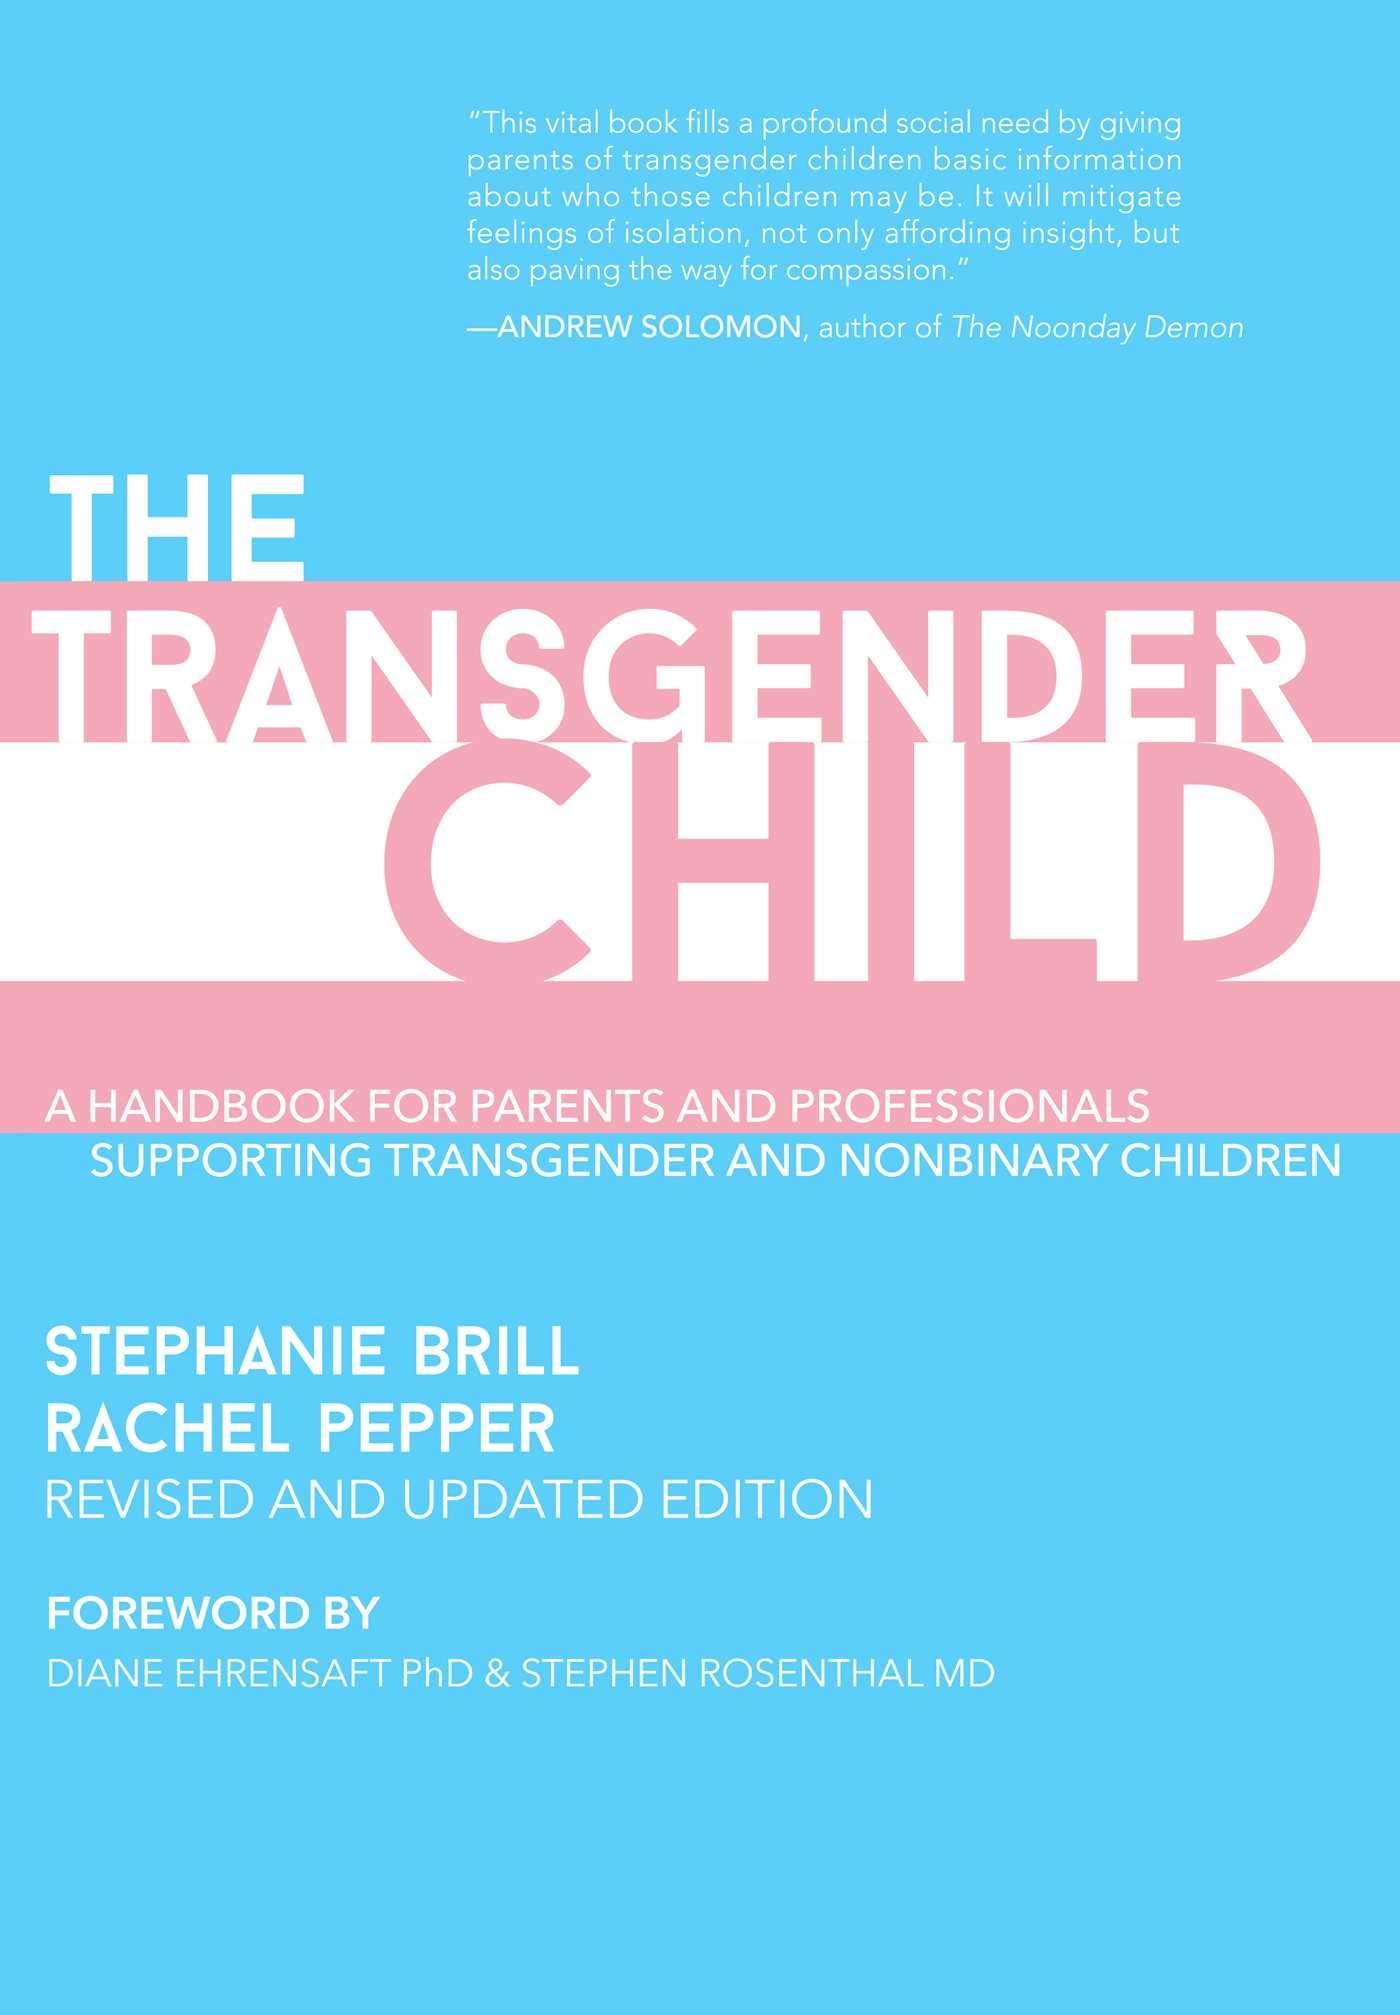 The Transgender Child: Revised & Updated Edition: A Handbook for Parents and Professionals Supporting Transgender and Nonbinary Children - ShopQueer.co